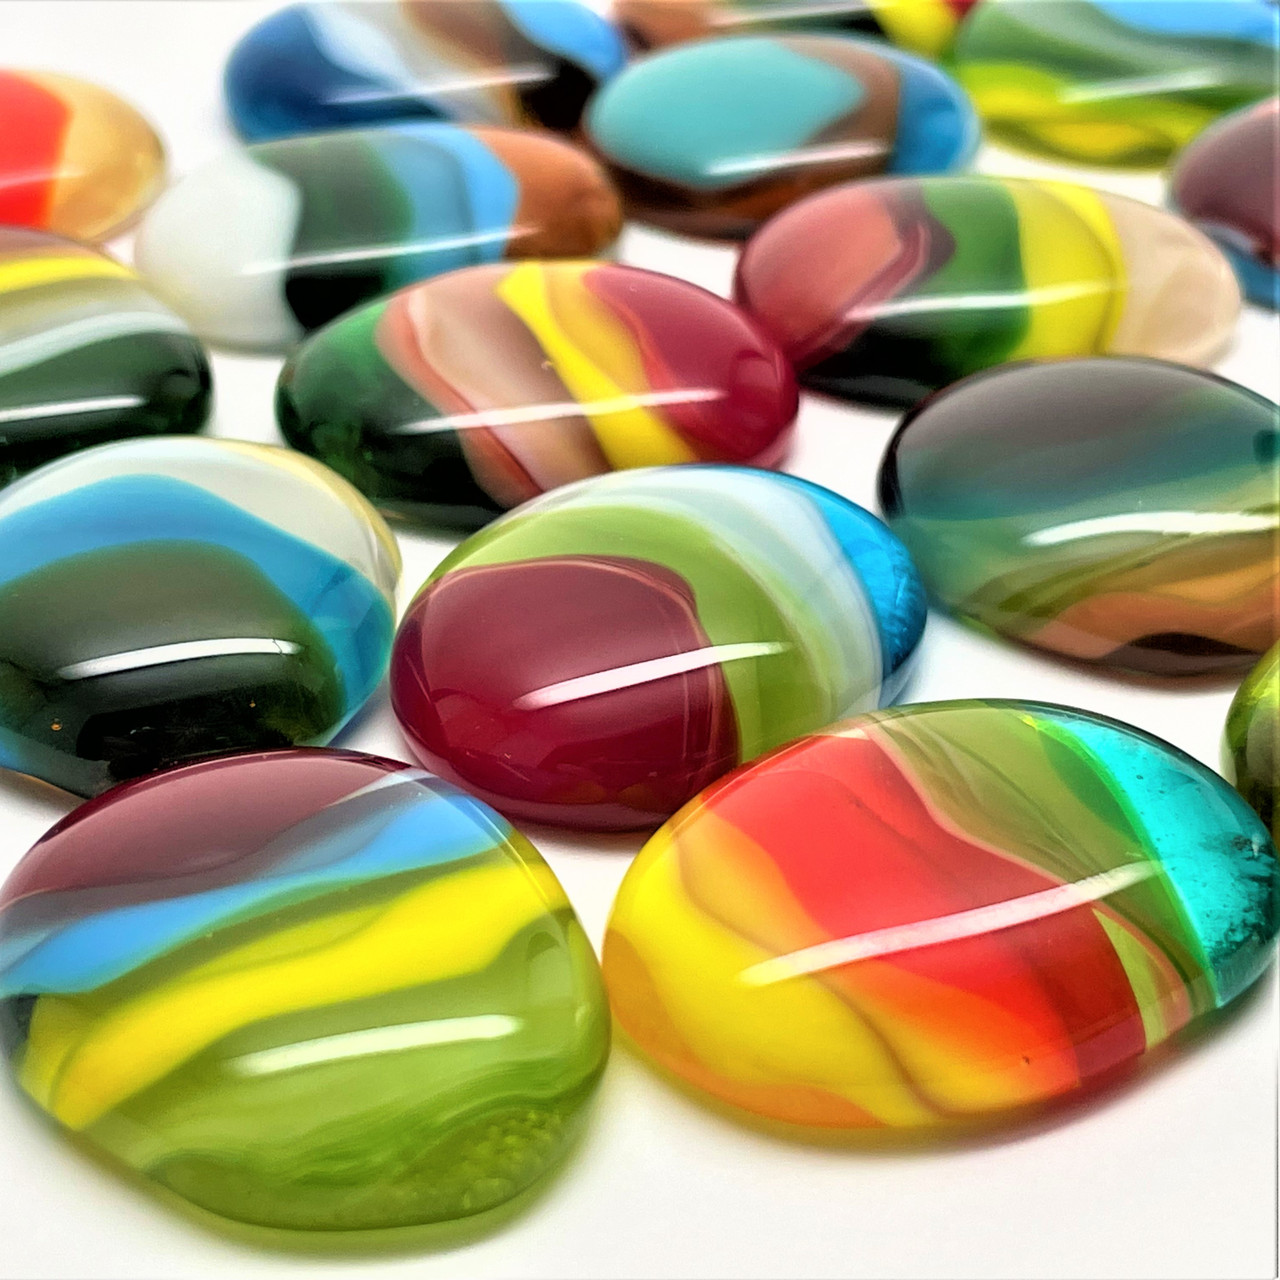 FUSED Stained Glass Tiles, 8pcs, Oval, Round, Oblong & Eggs